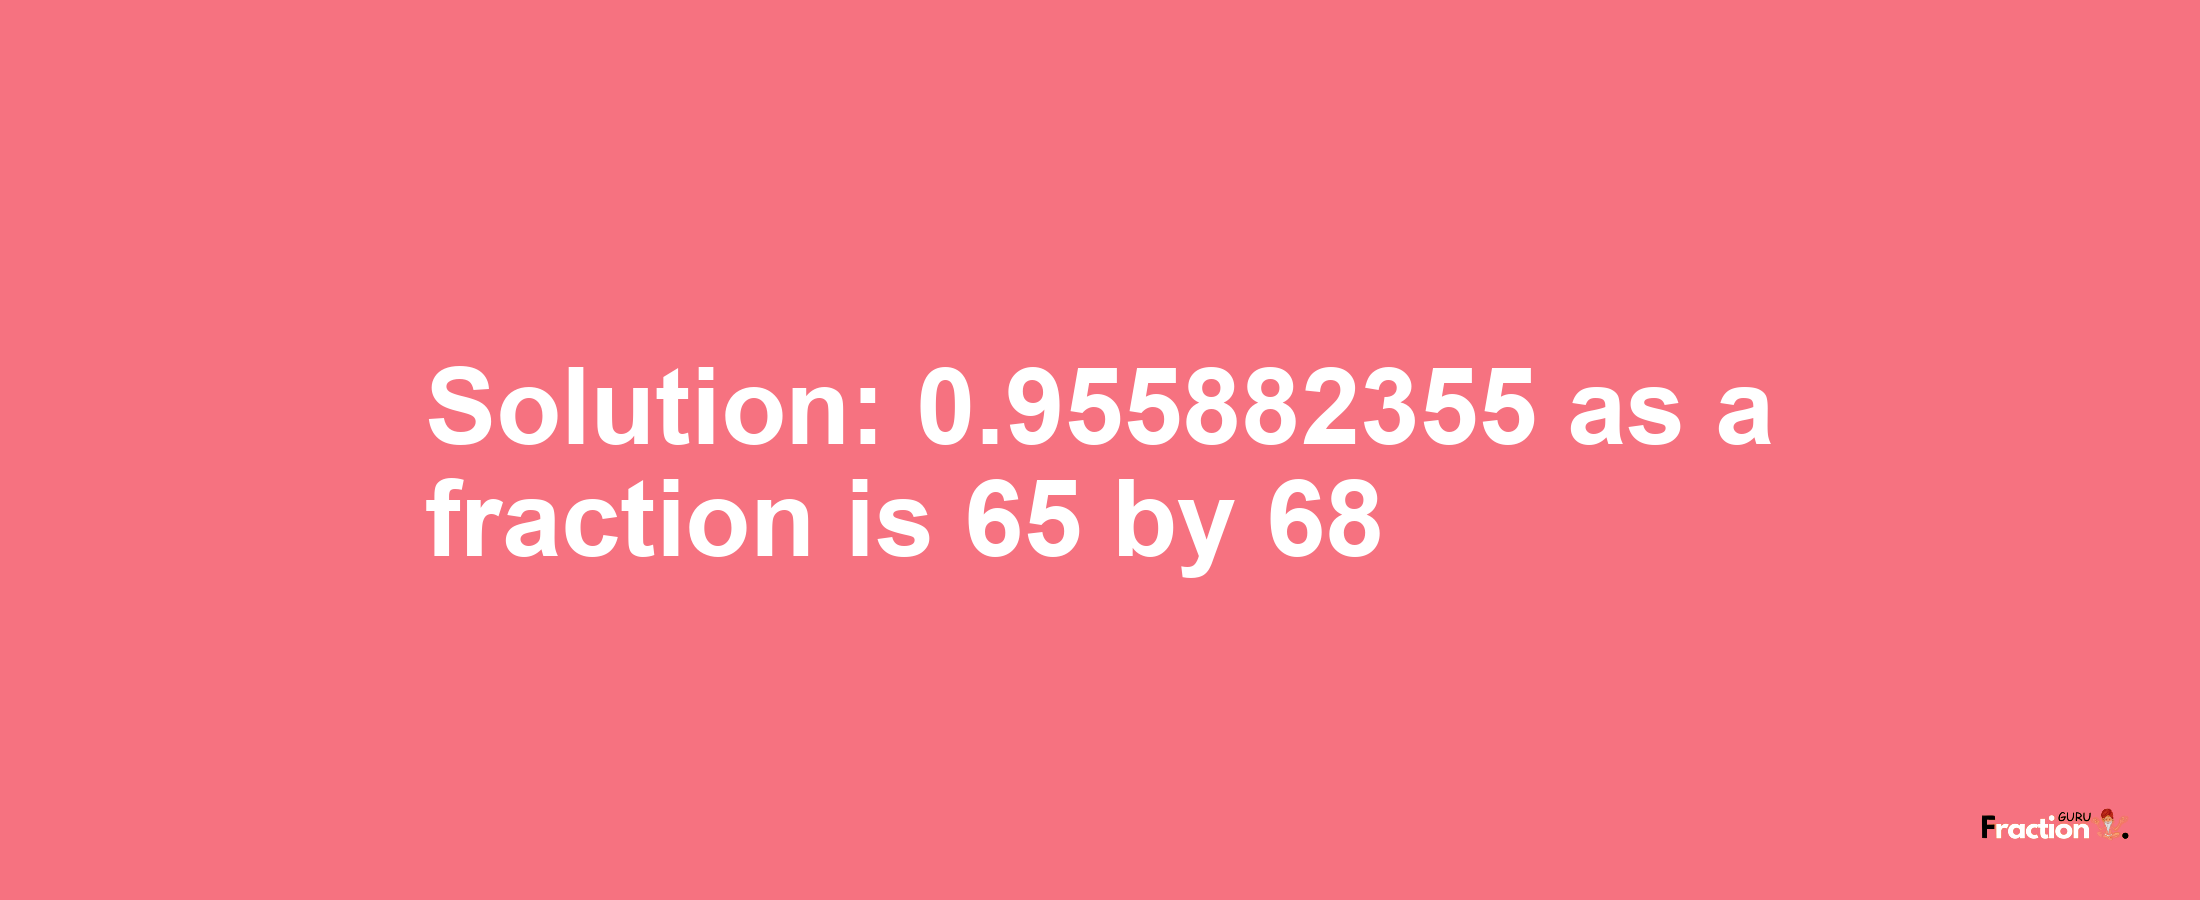 Solution:0.955882355 as a fraction is 65/68